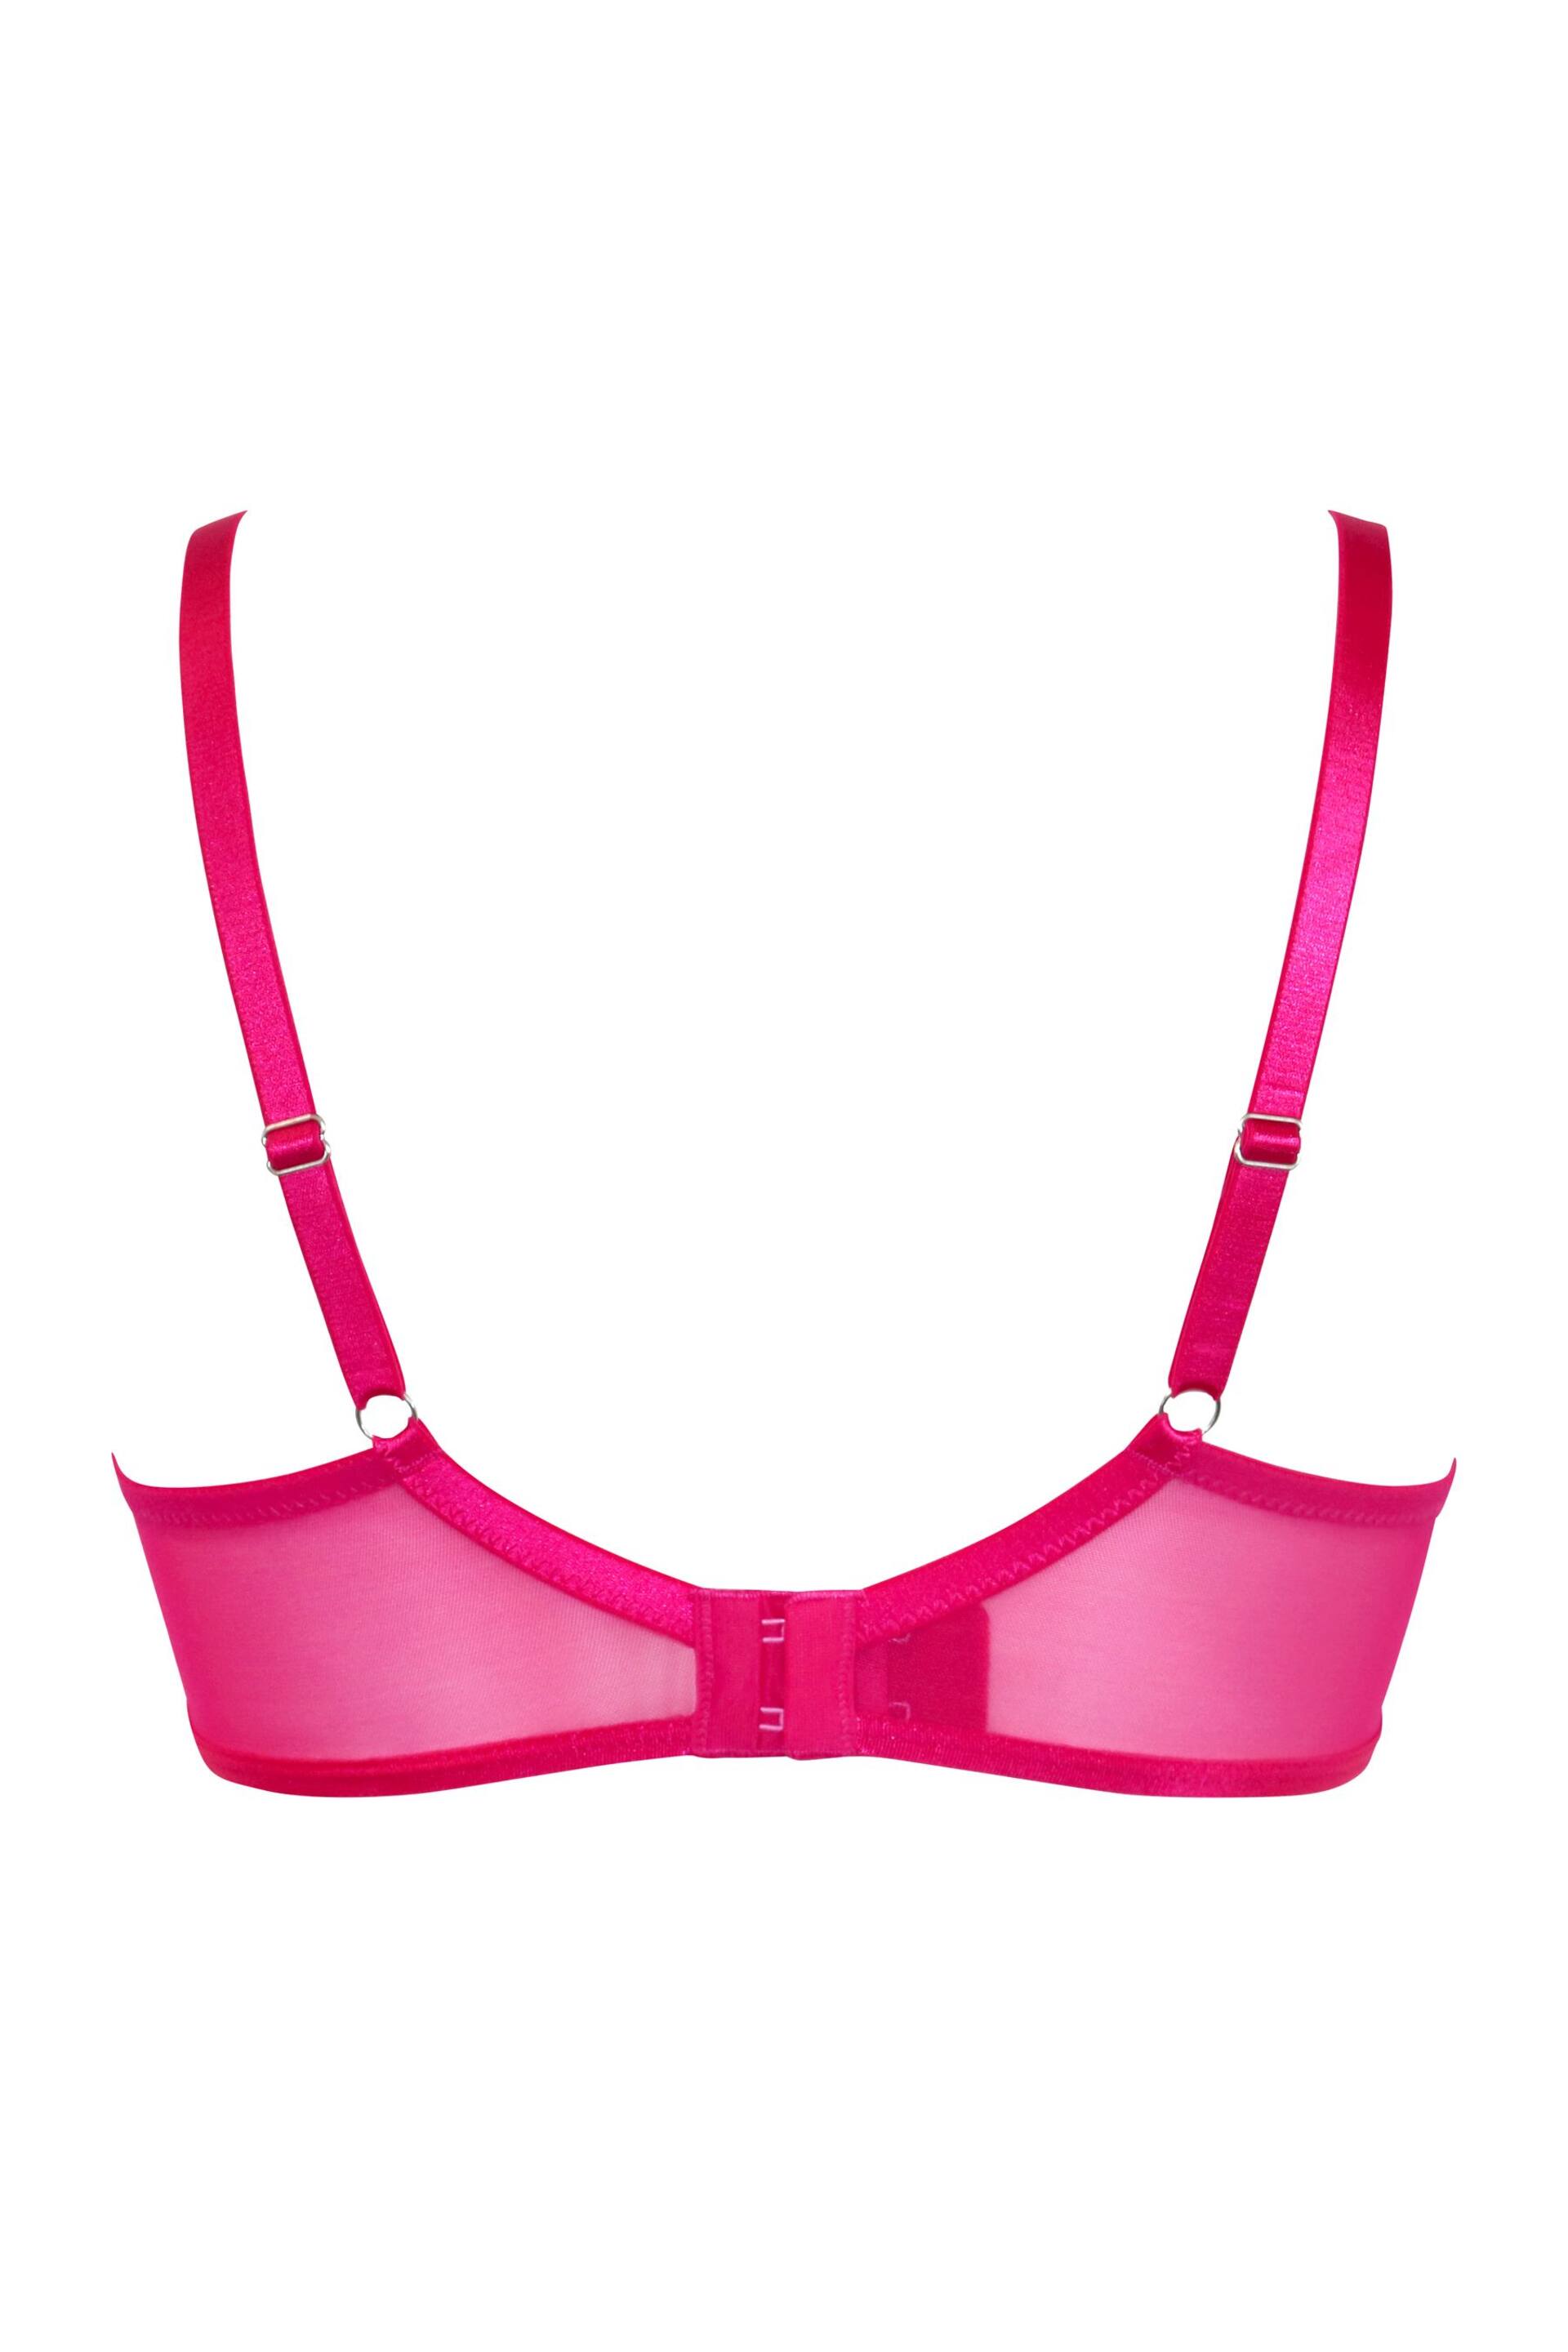 Pour Moi Pink Non Padded Viva Luxe Underwired Bra - Image 5 of 5